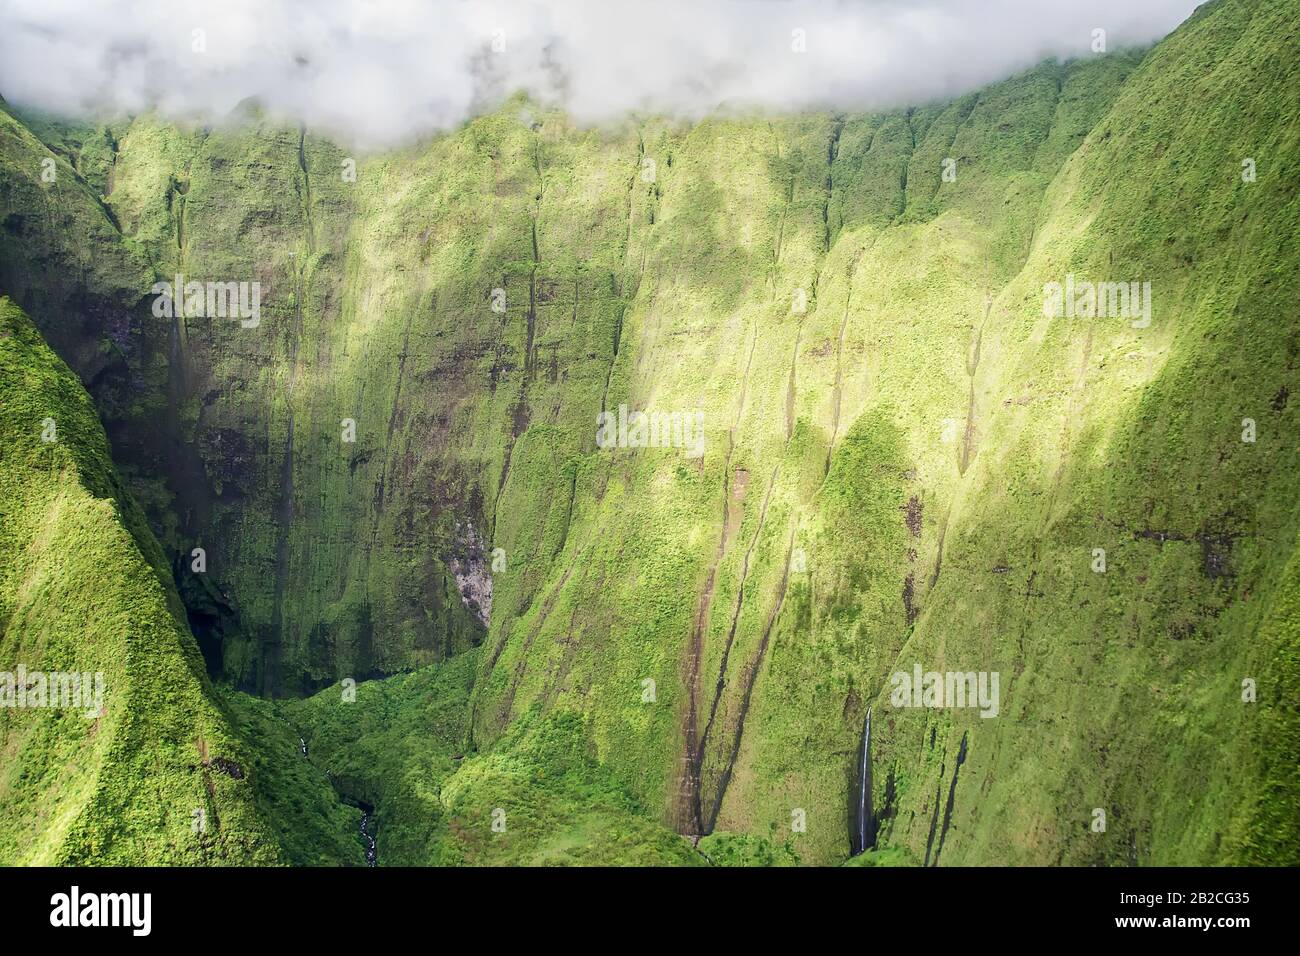 Kauai, Hawaii: Aerial view of the 'Wall of Tears' in the crater of Mount Waialeale (one of the rainiest spots on earth) Stock Photo